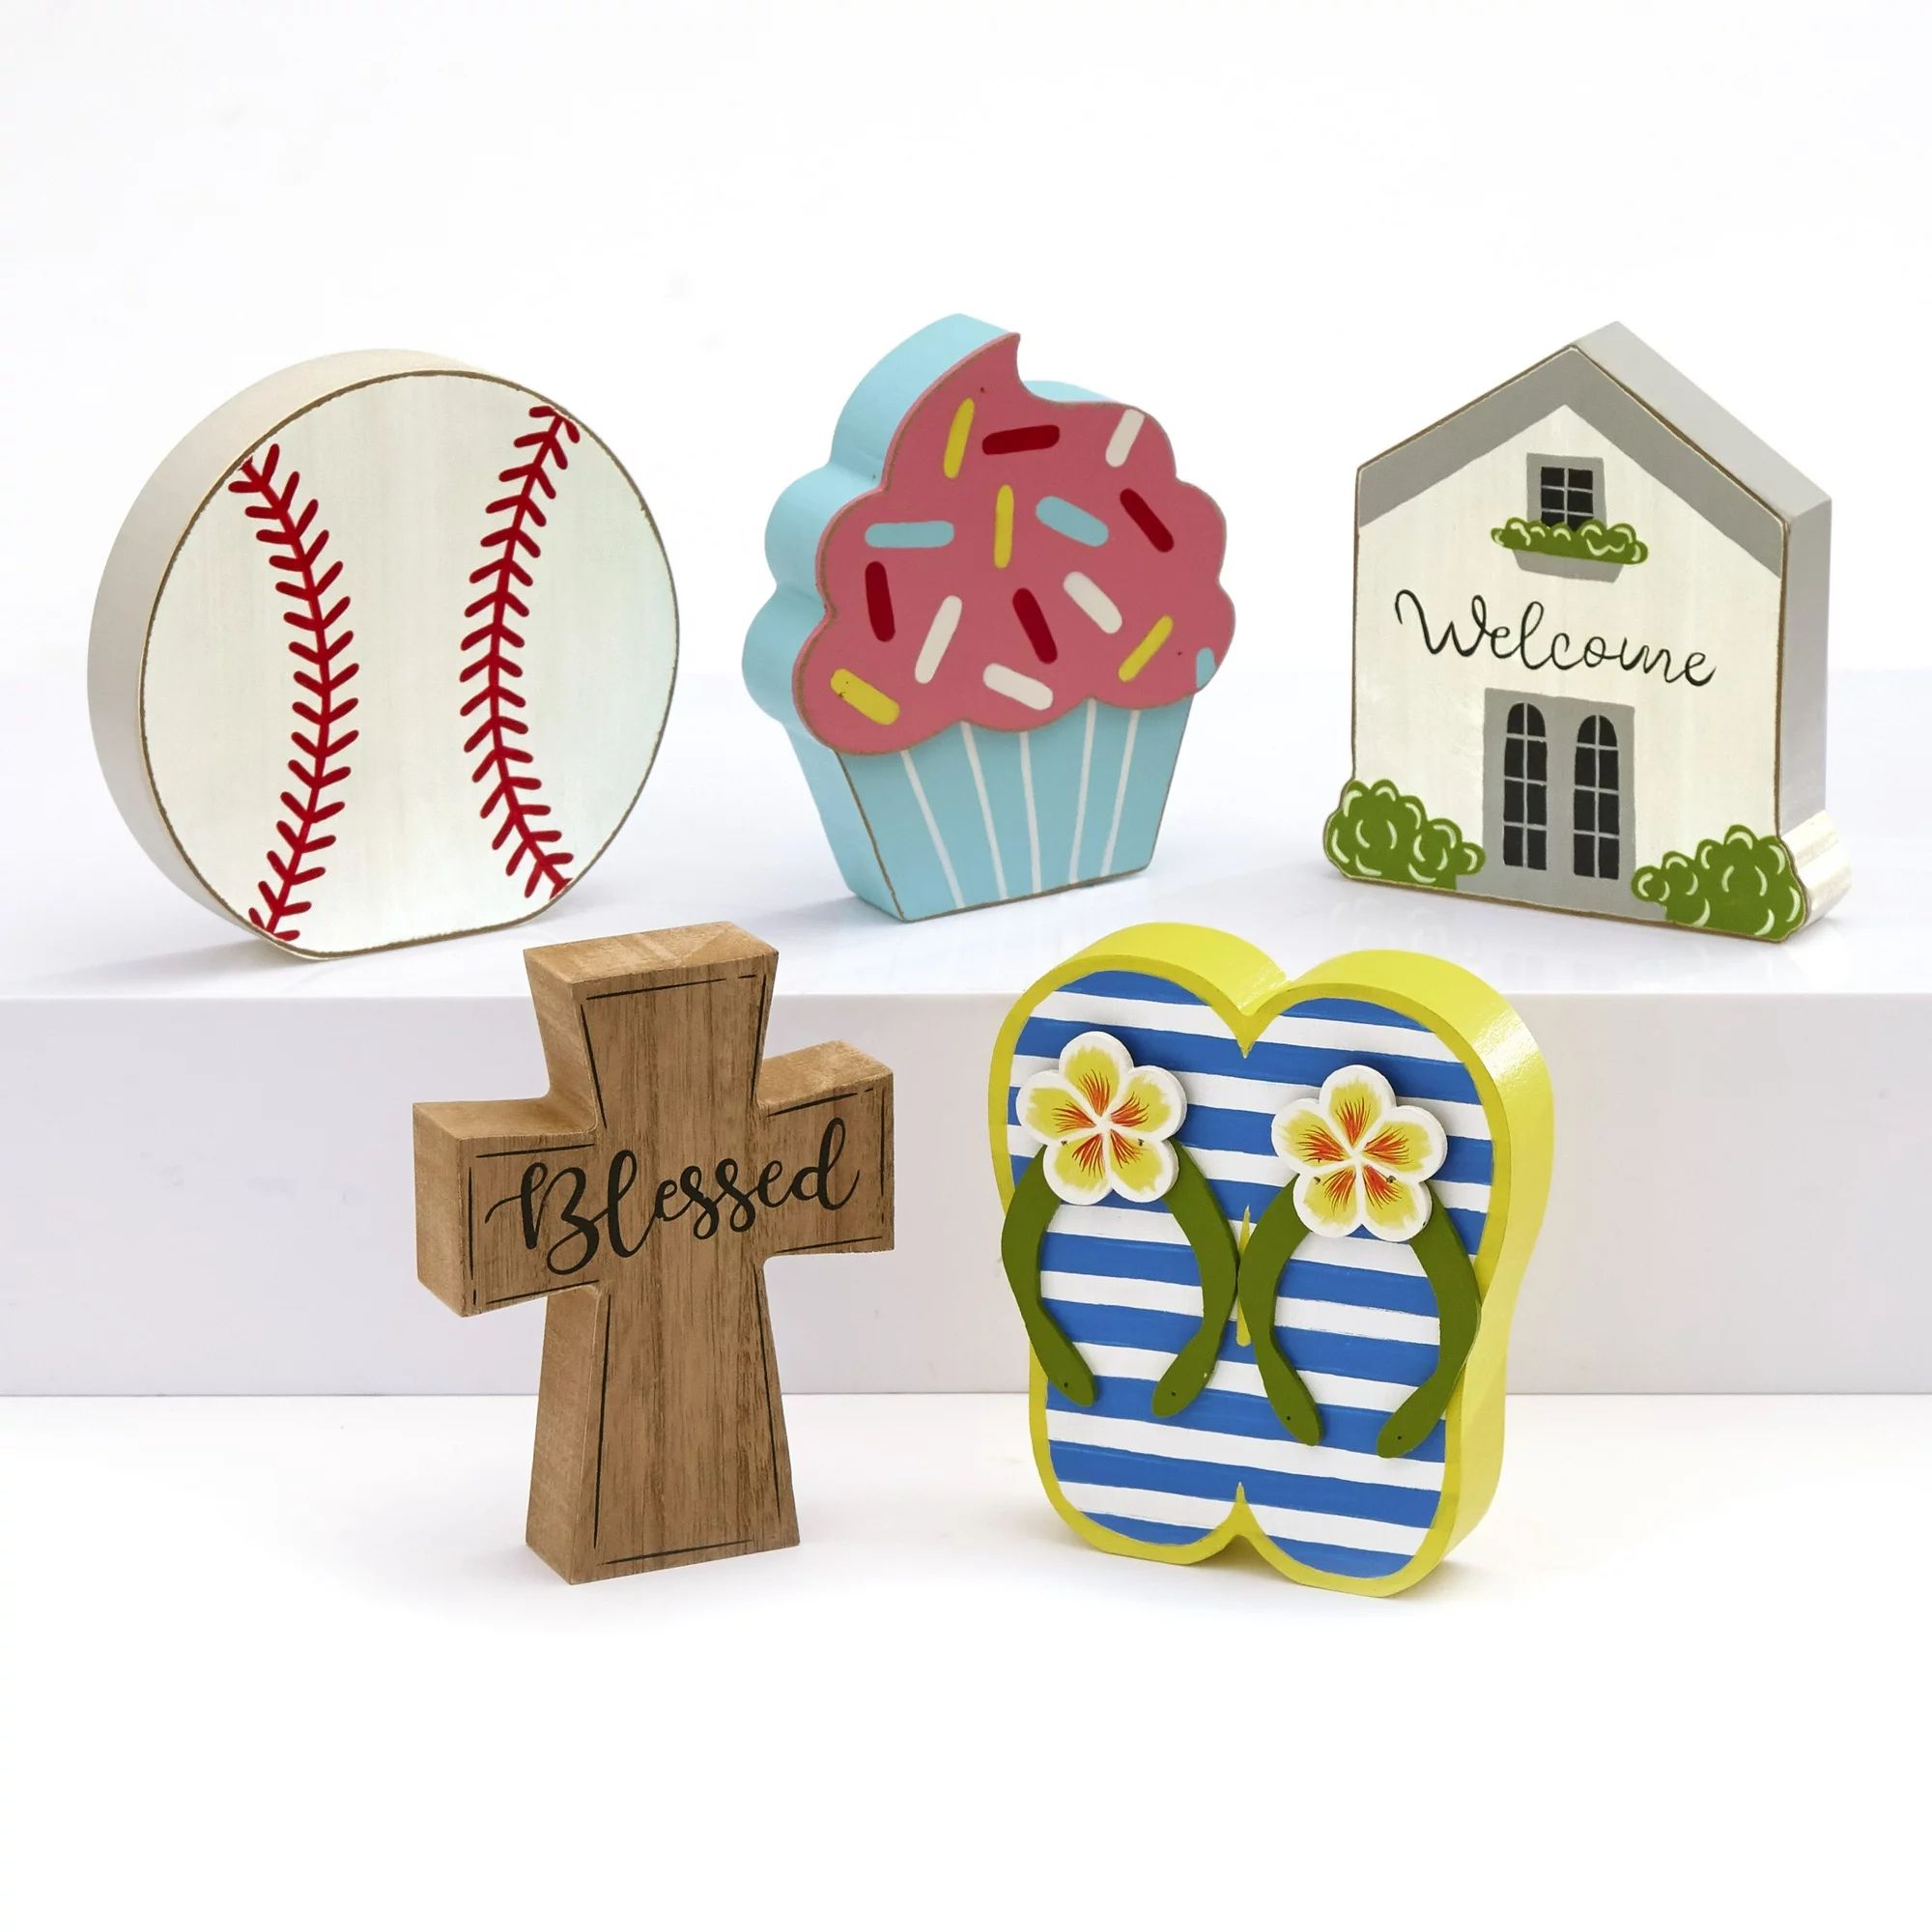 Spring and Summer Seasons Interchangeable Home Decoration Icons Set - 5 Pieces | Walmart (US)